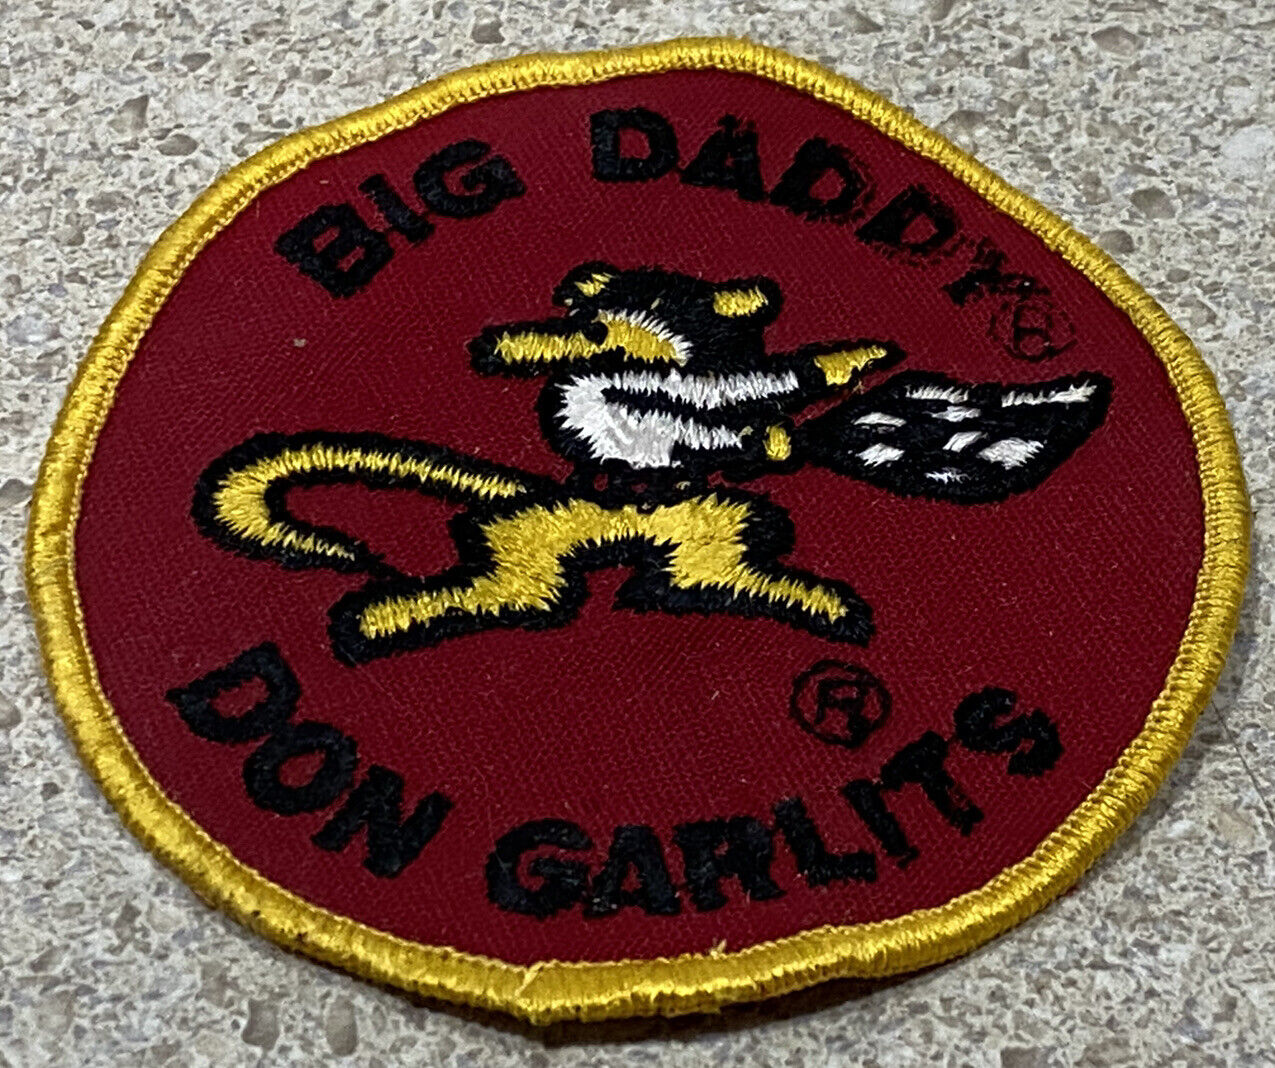 VINTAGE BIG DADDY DON GARLITS RACE CAR Patch (Race Car Auto Related) - Rare